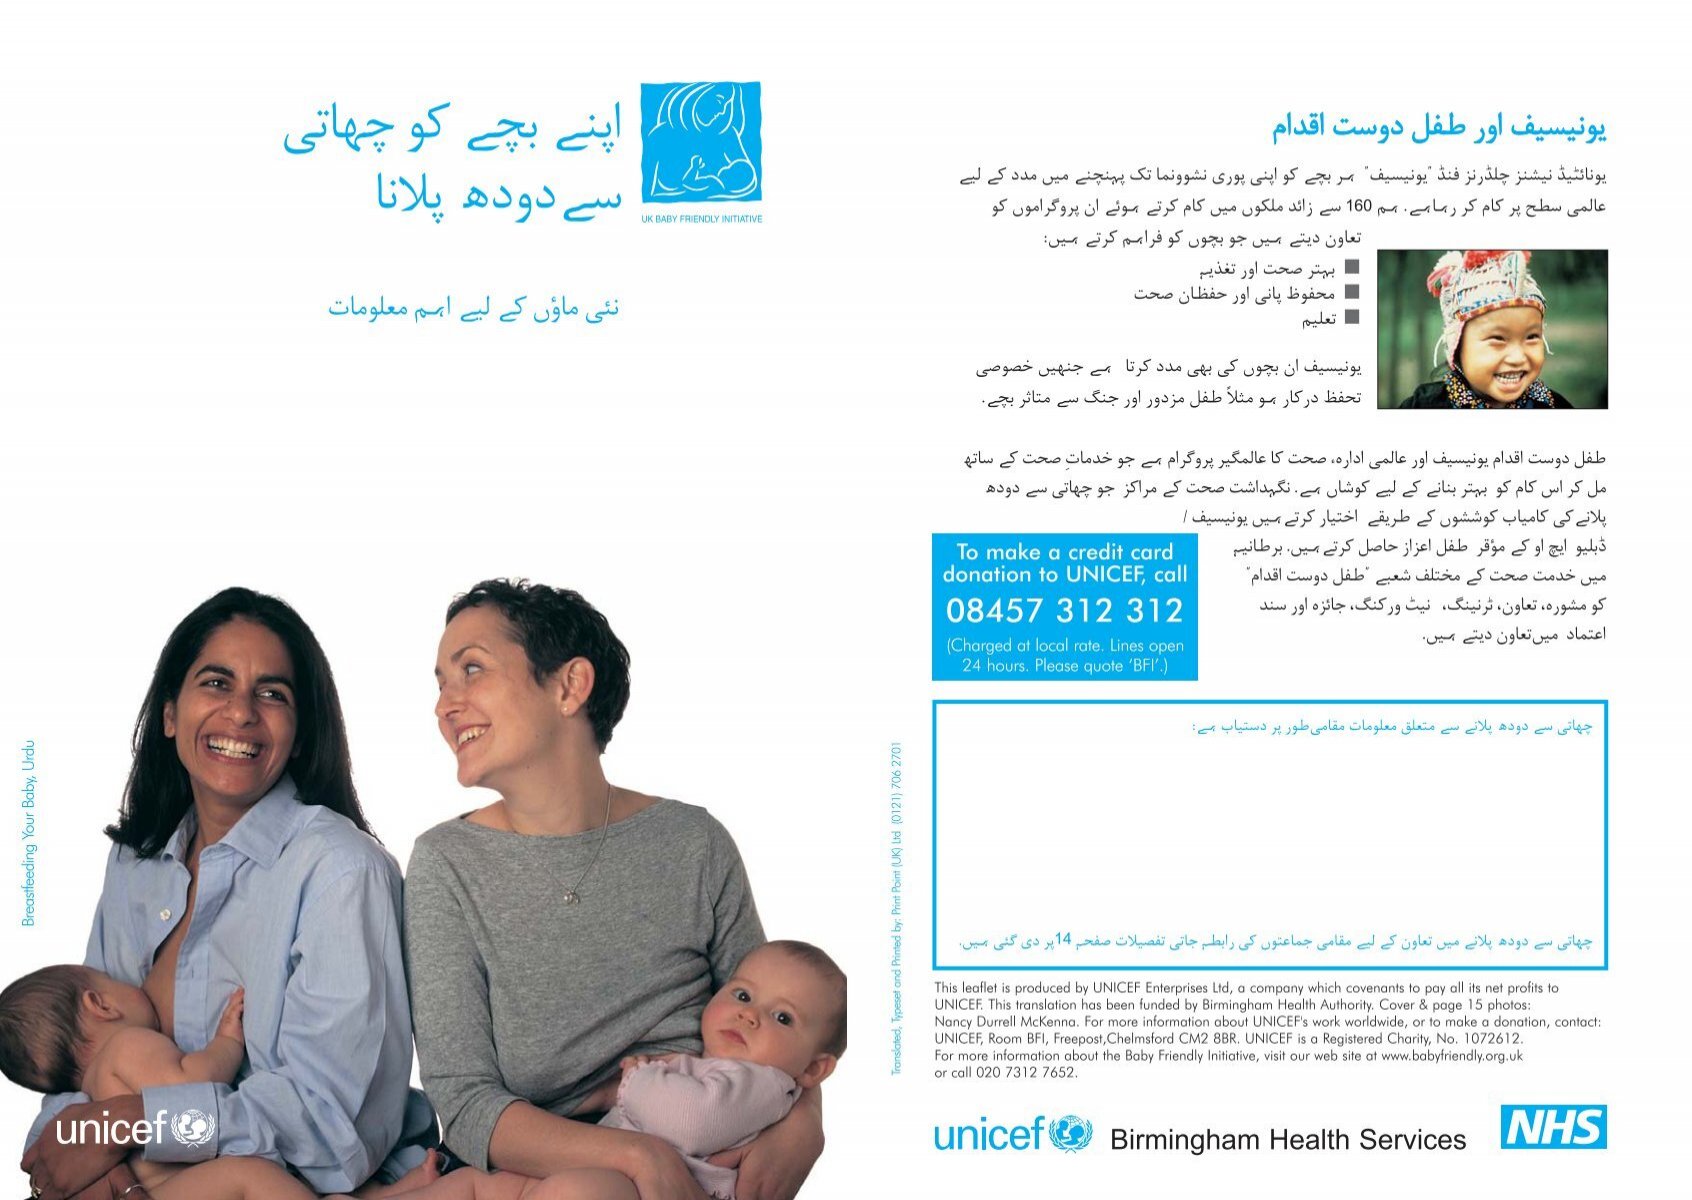 UNICEF on X: Breastfeeding is good for mothers and babies. In